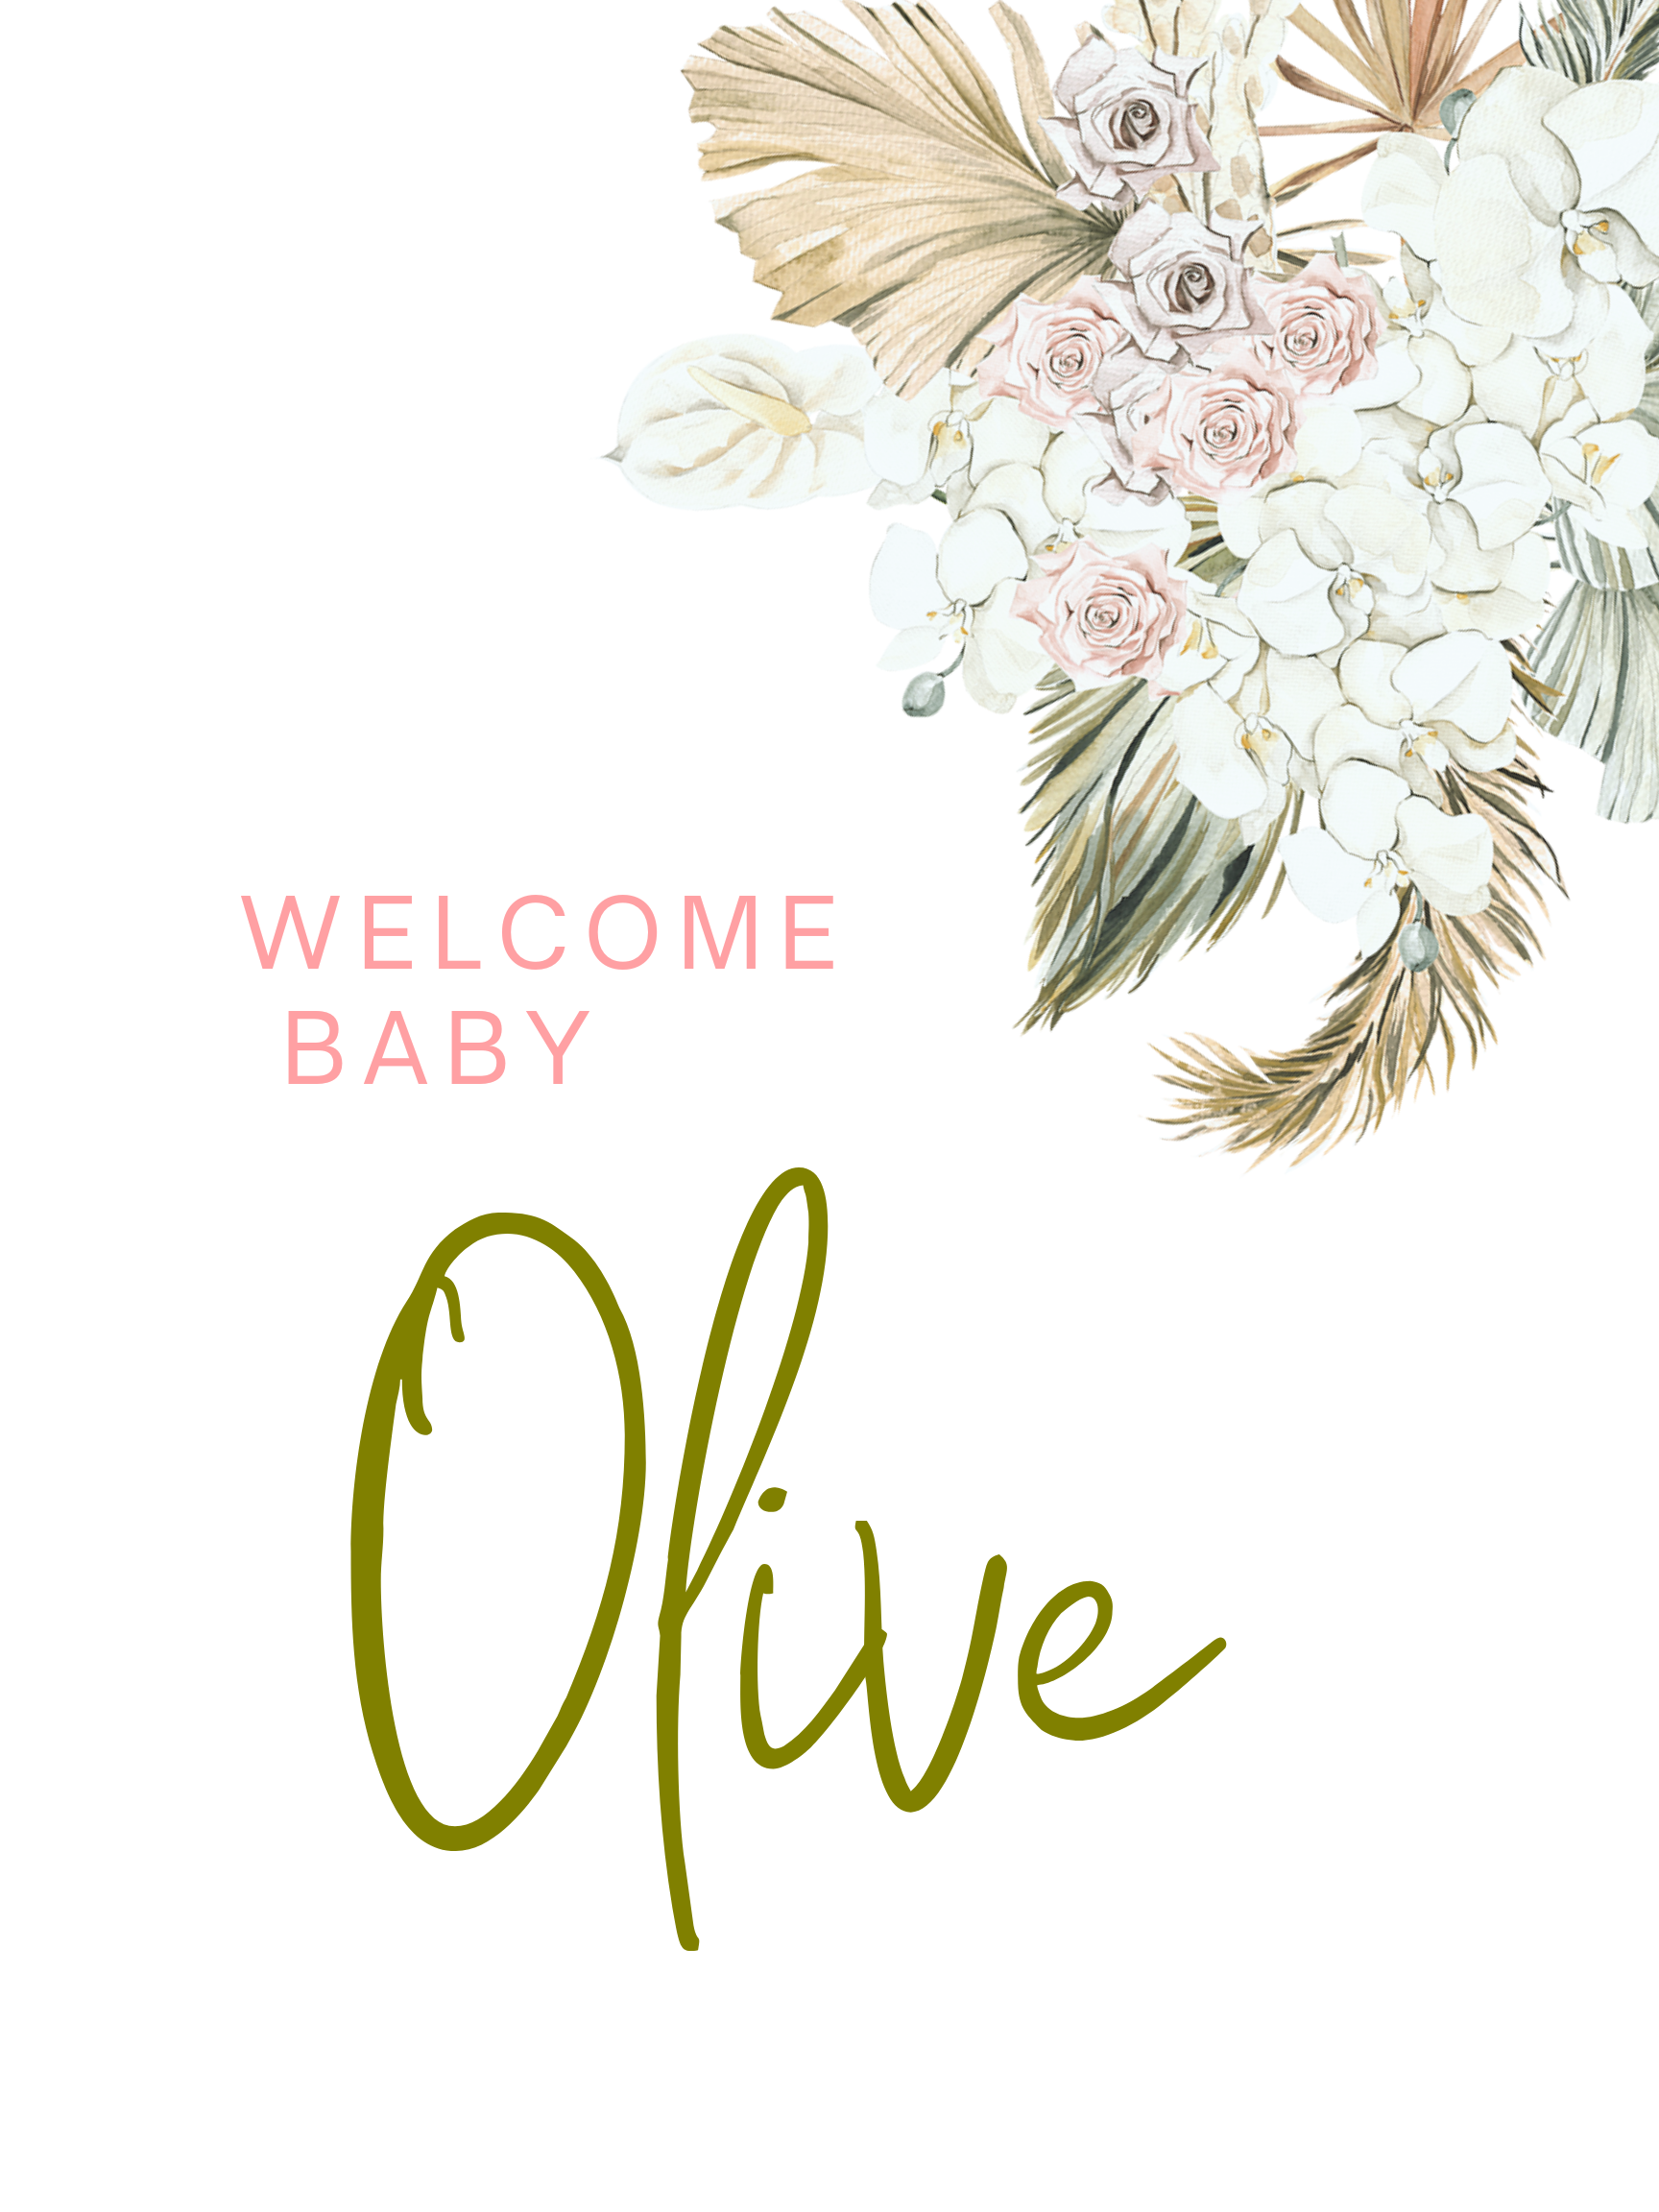 Three Baby in Bloom Baby Shower Sign Templates